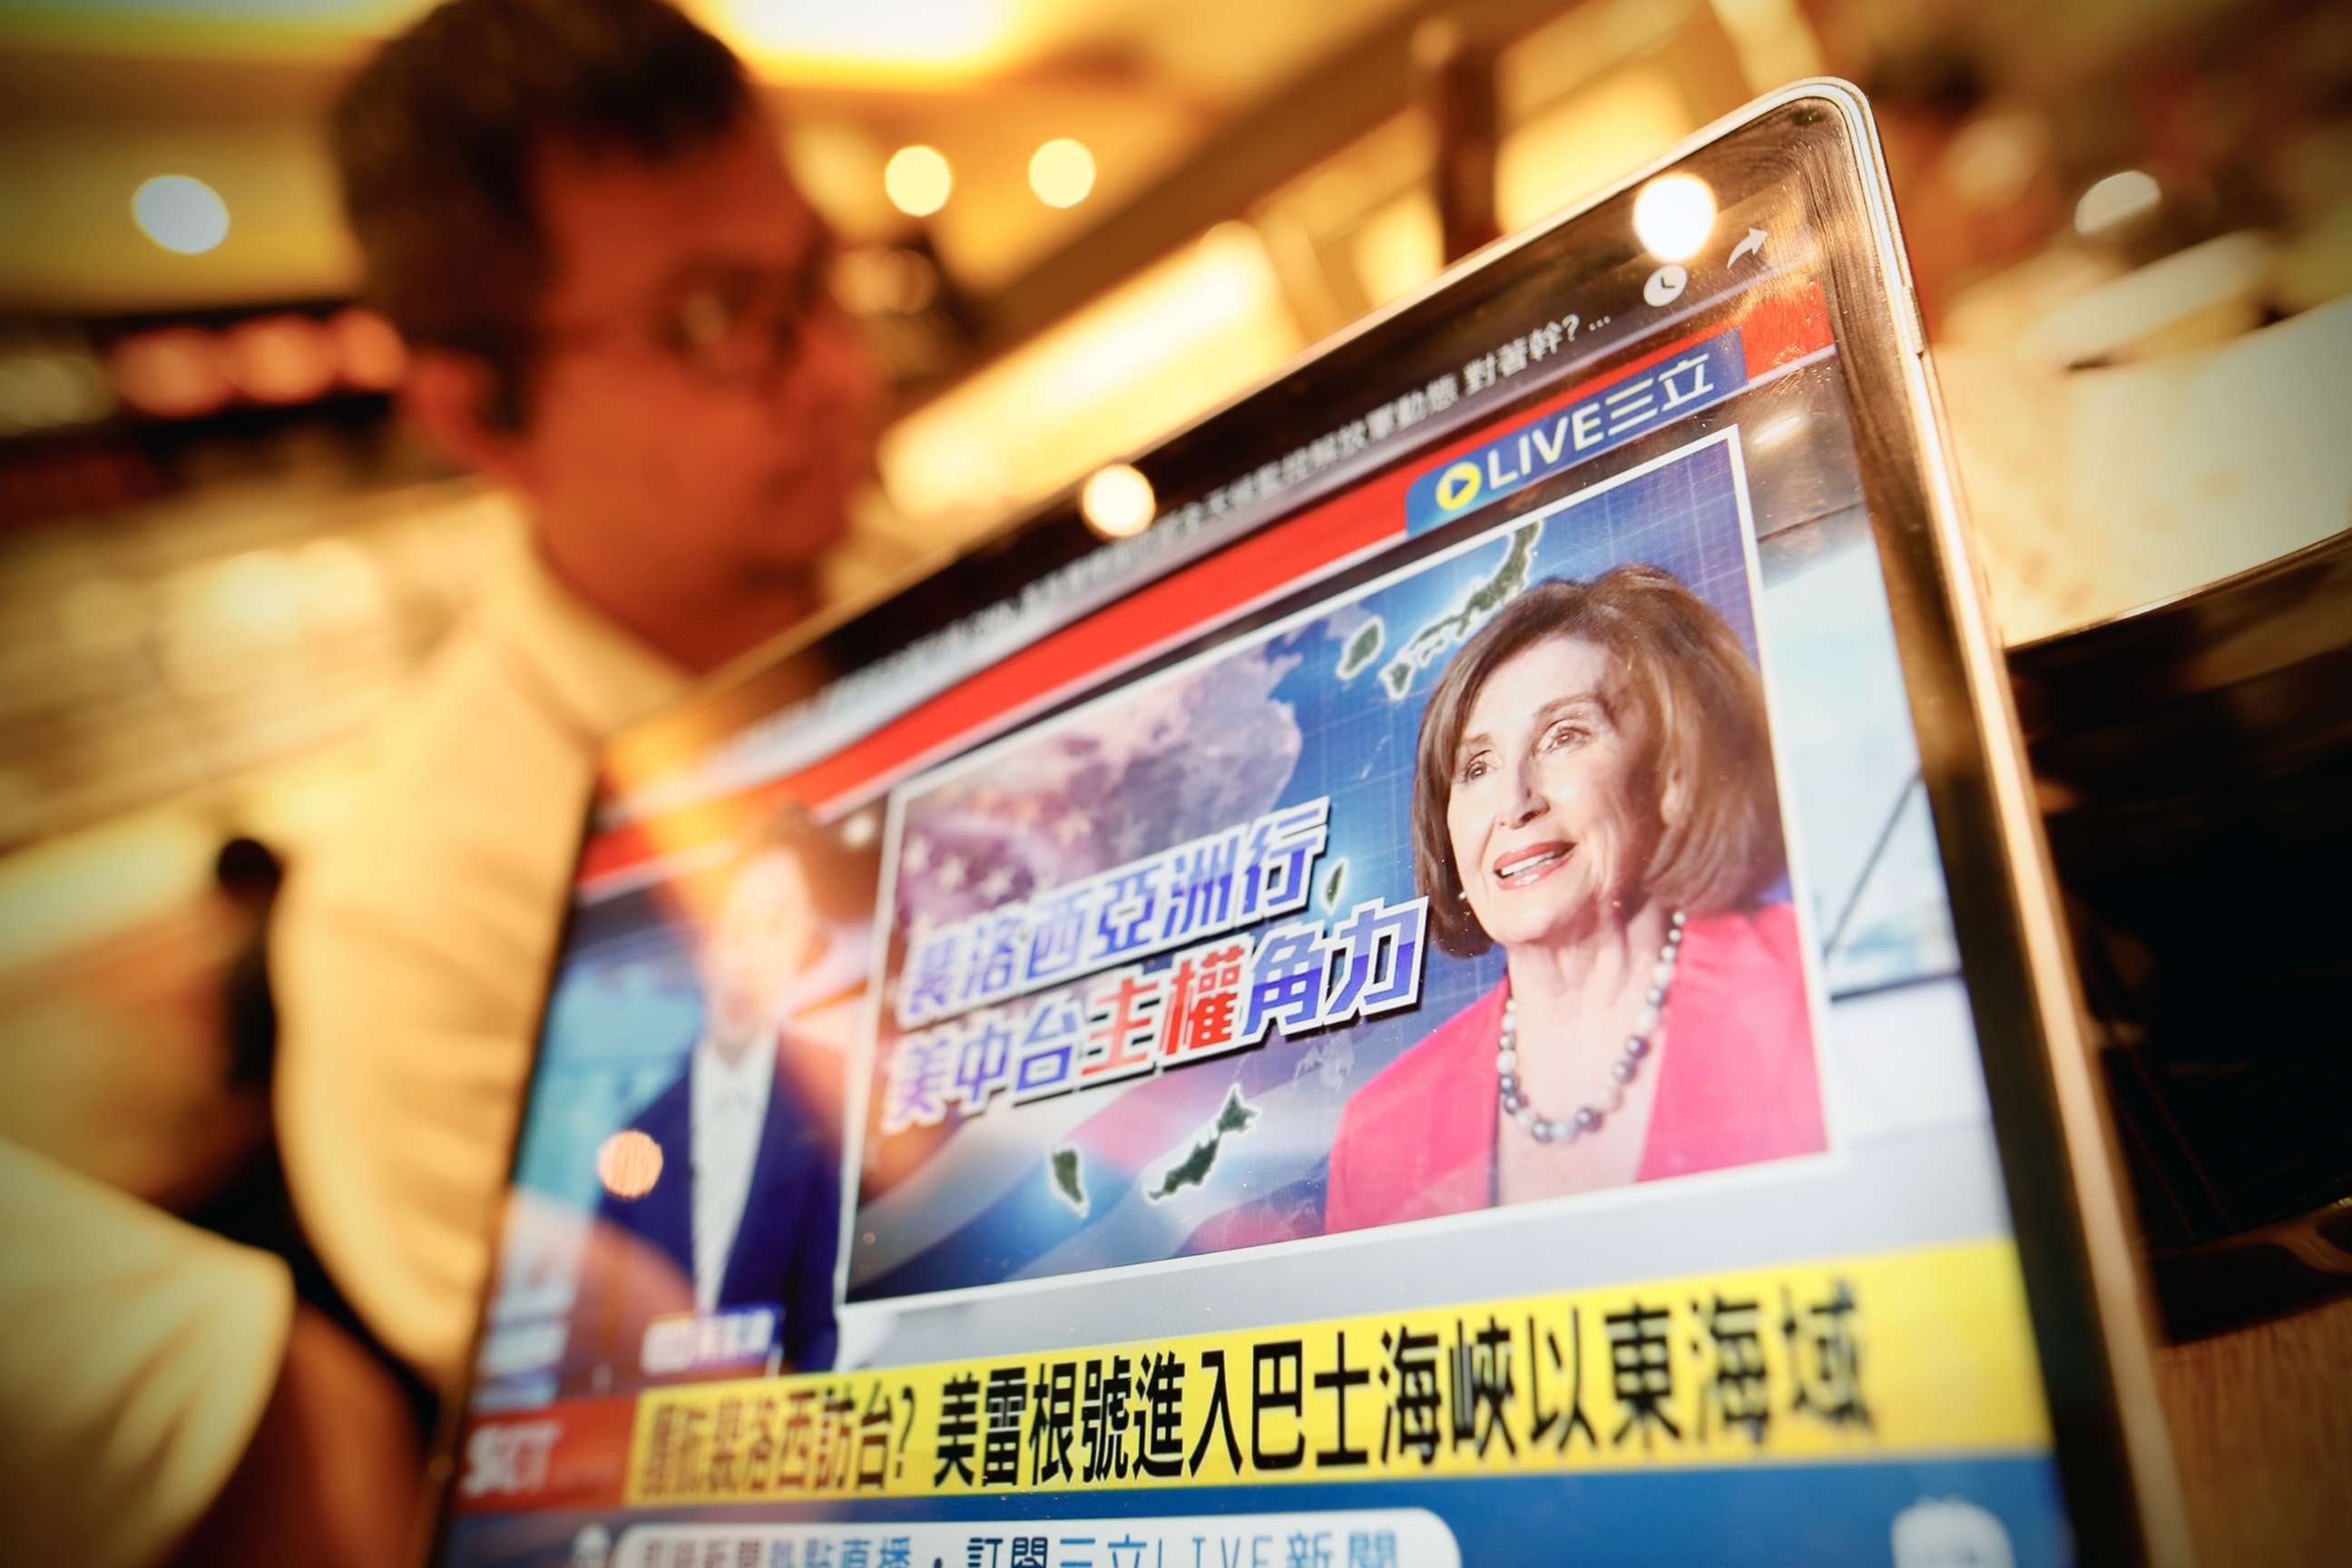 PHOTO: A person watches a news channel about the potential visit of U.S. House Speaker Nancy Pelosi in Taipei, Taiwan, Aug. 2, 2022.